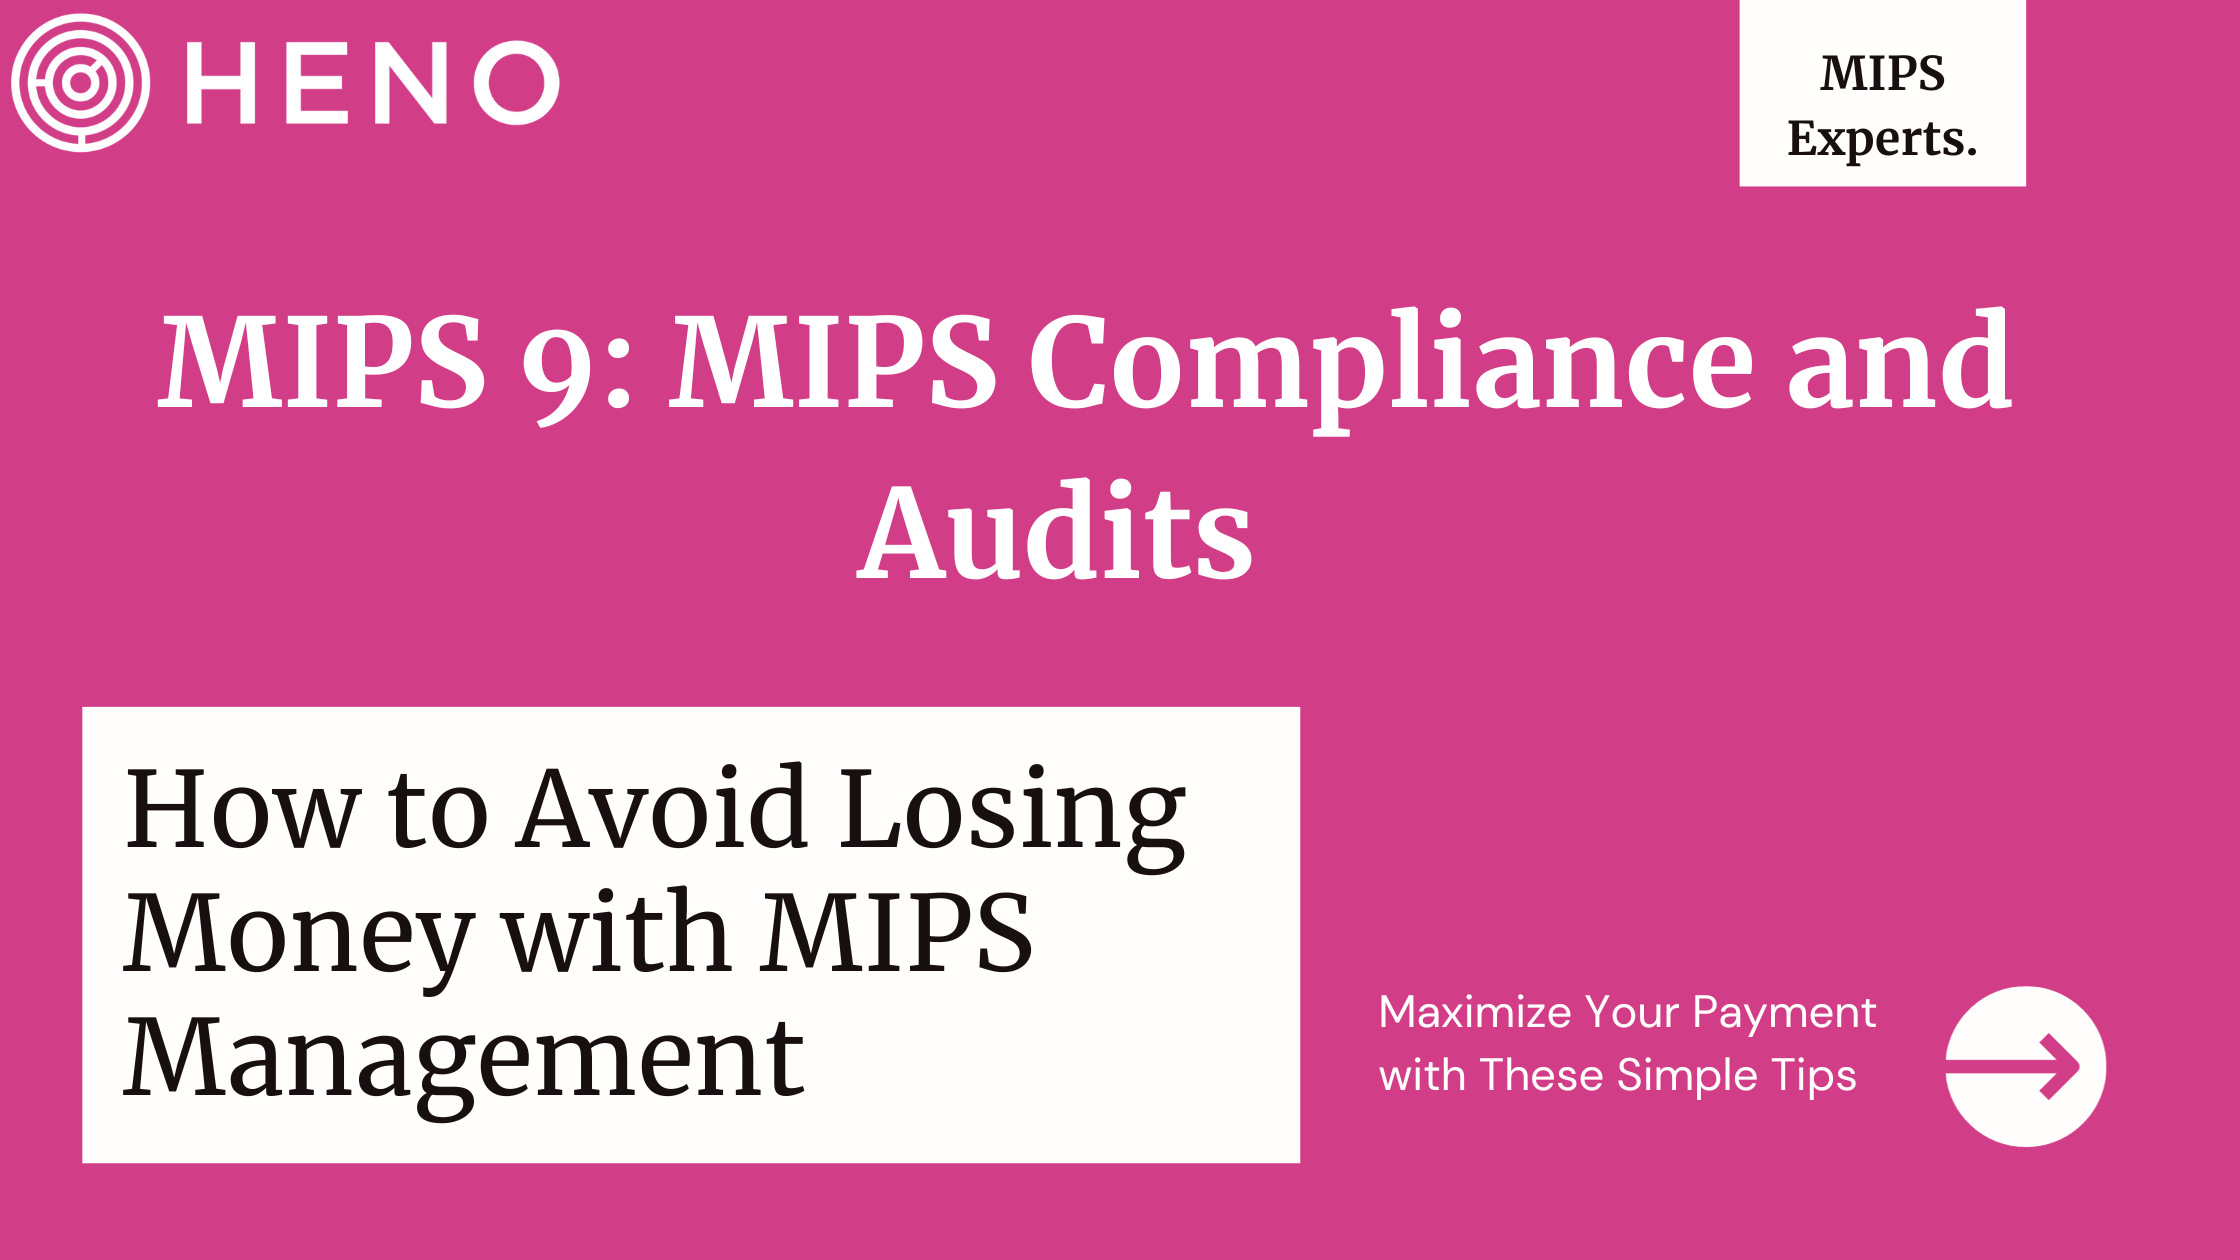 MIPS Compliance and Audits in Physical Therapy